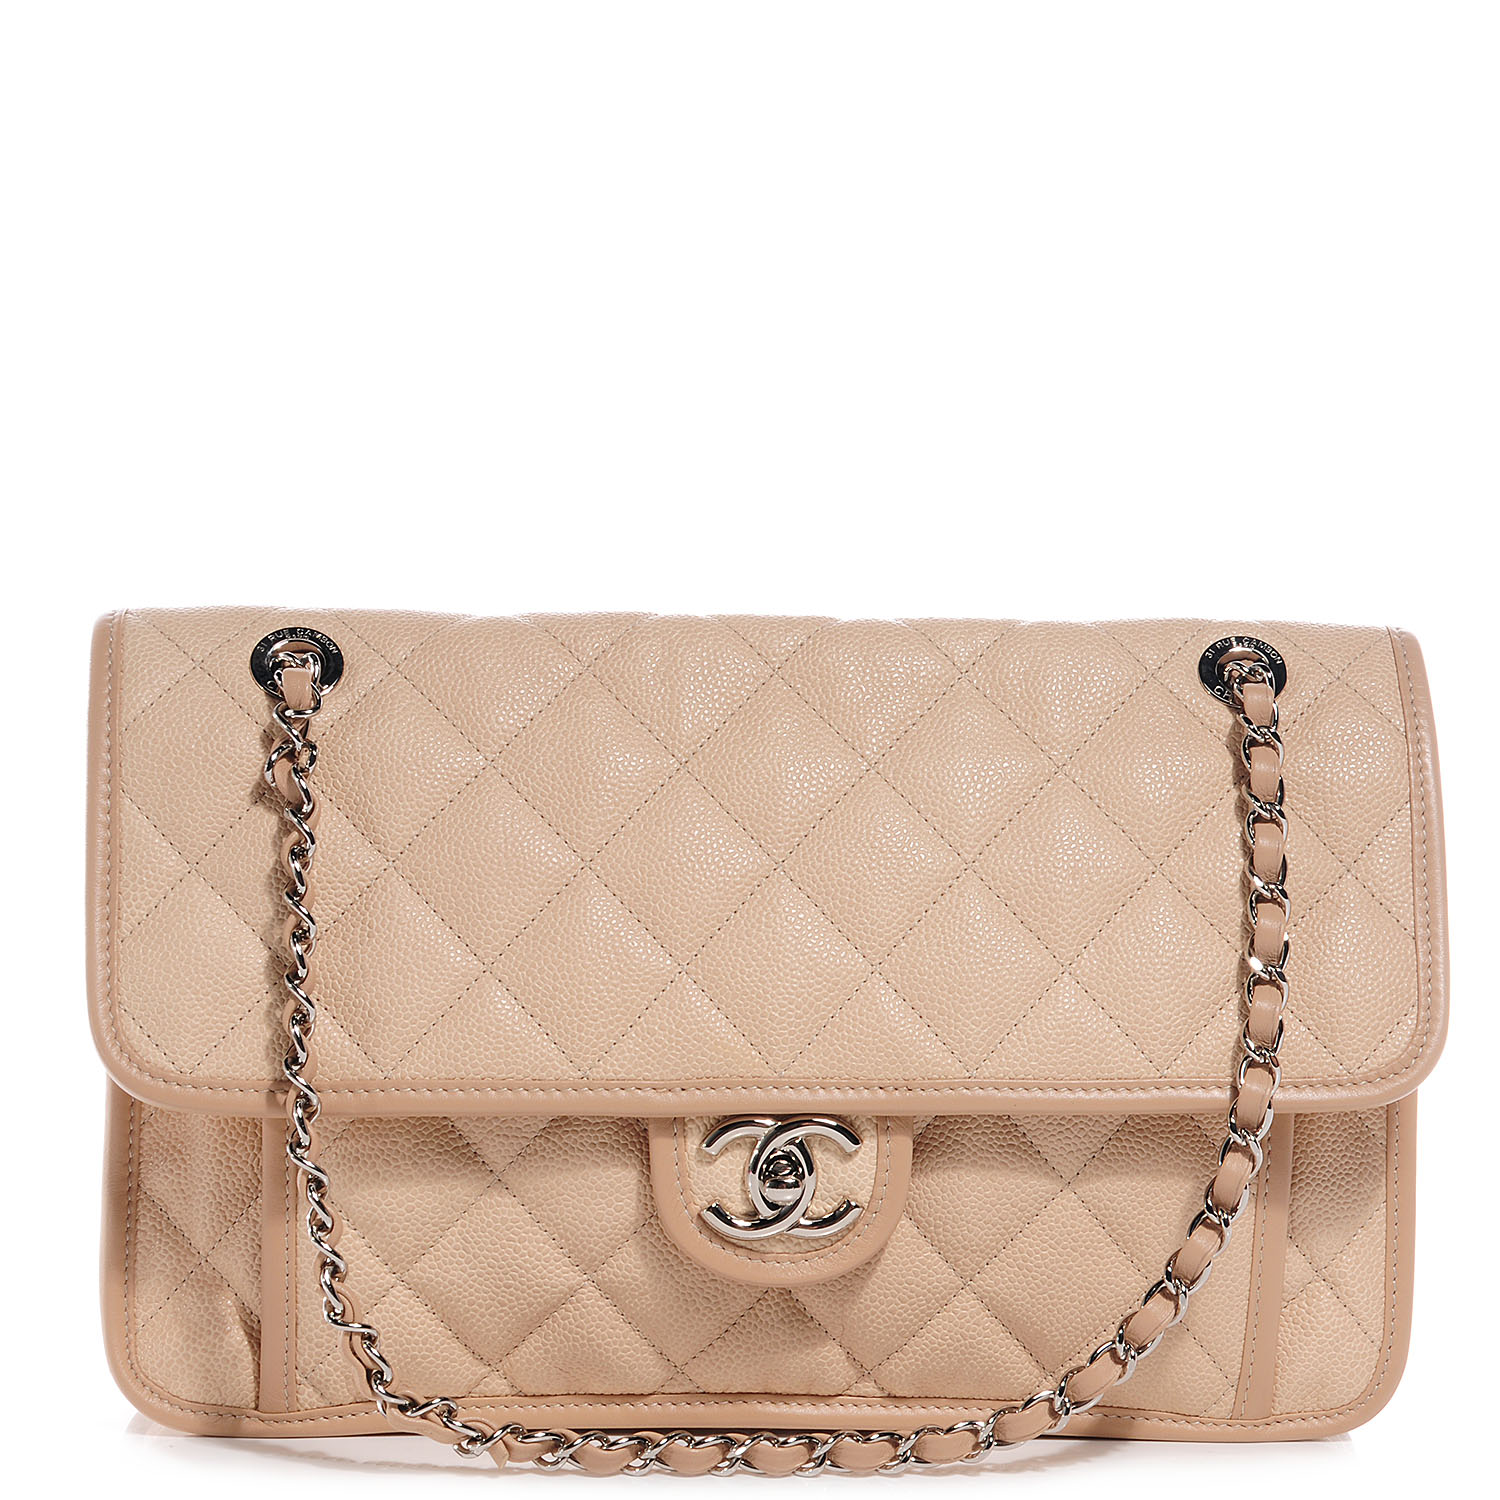 CHANEL Caviar French Riviera Large Flap Beige 62278